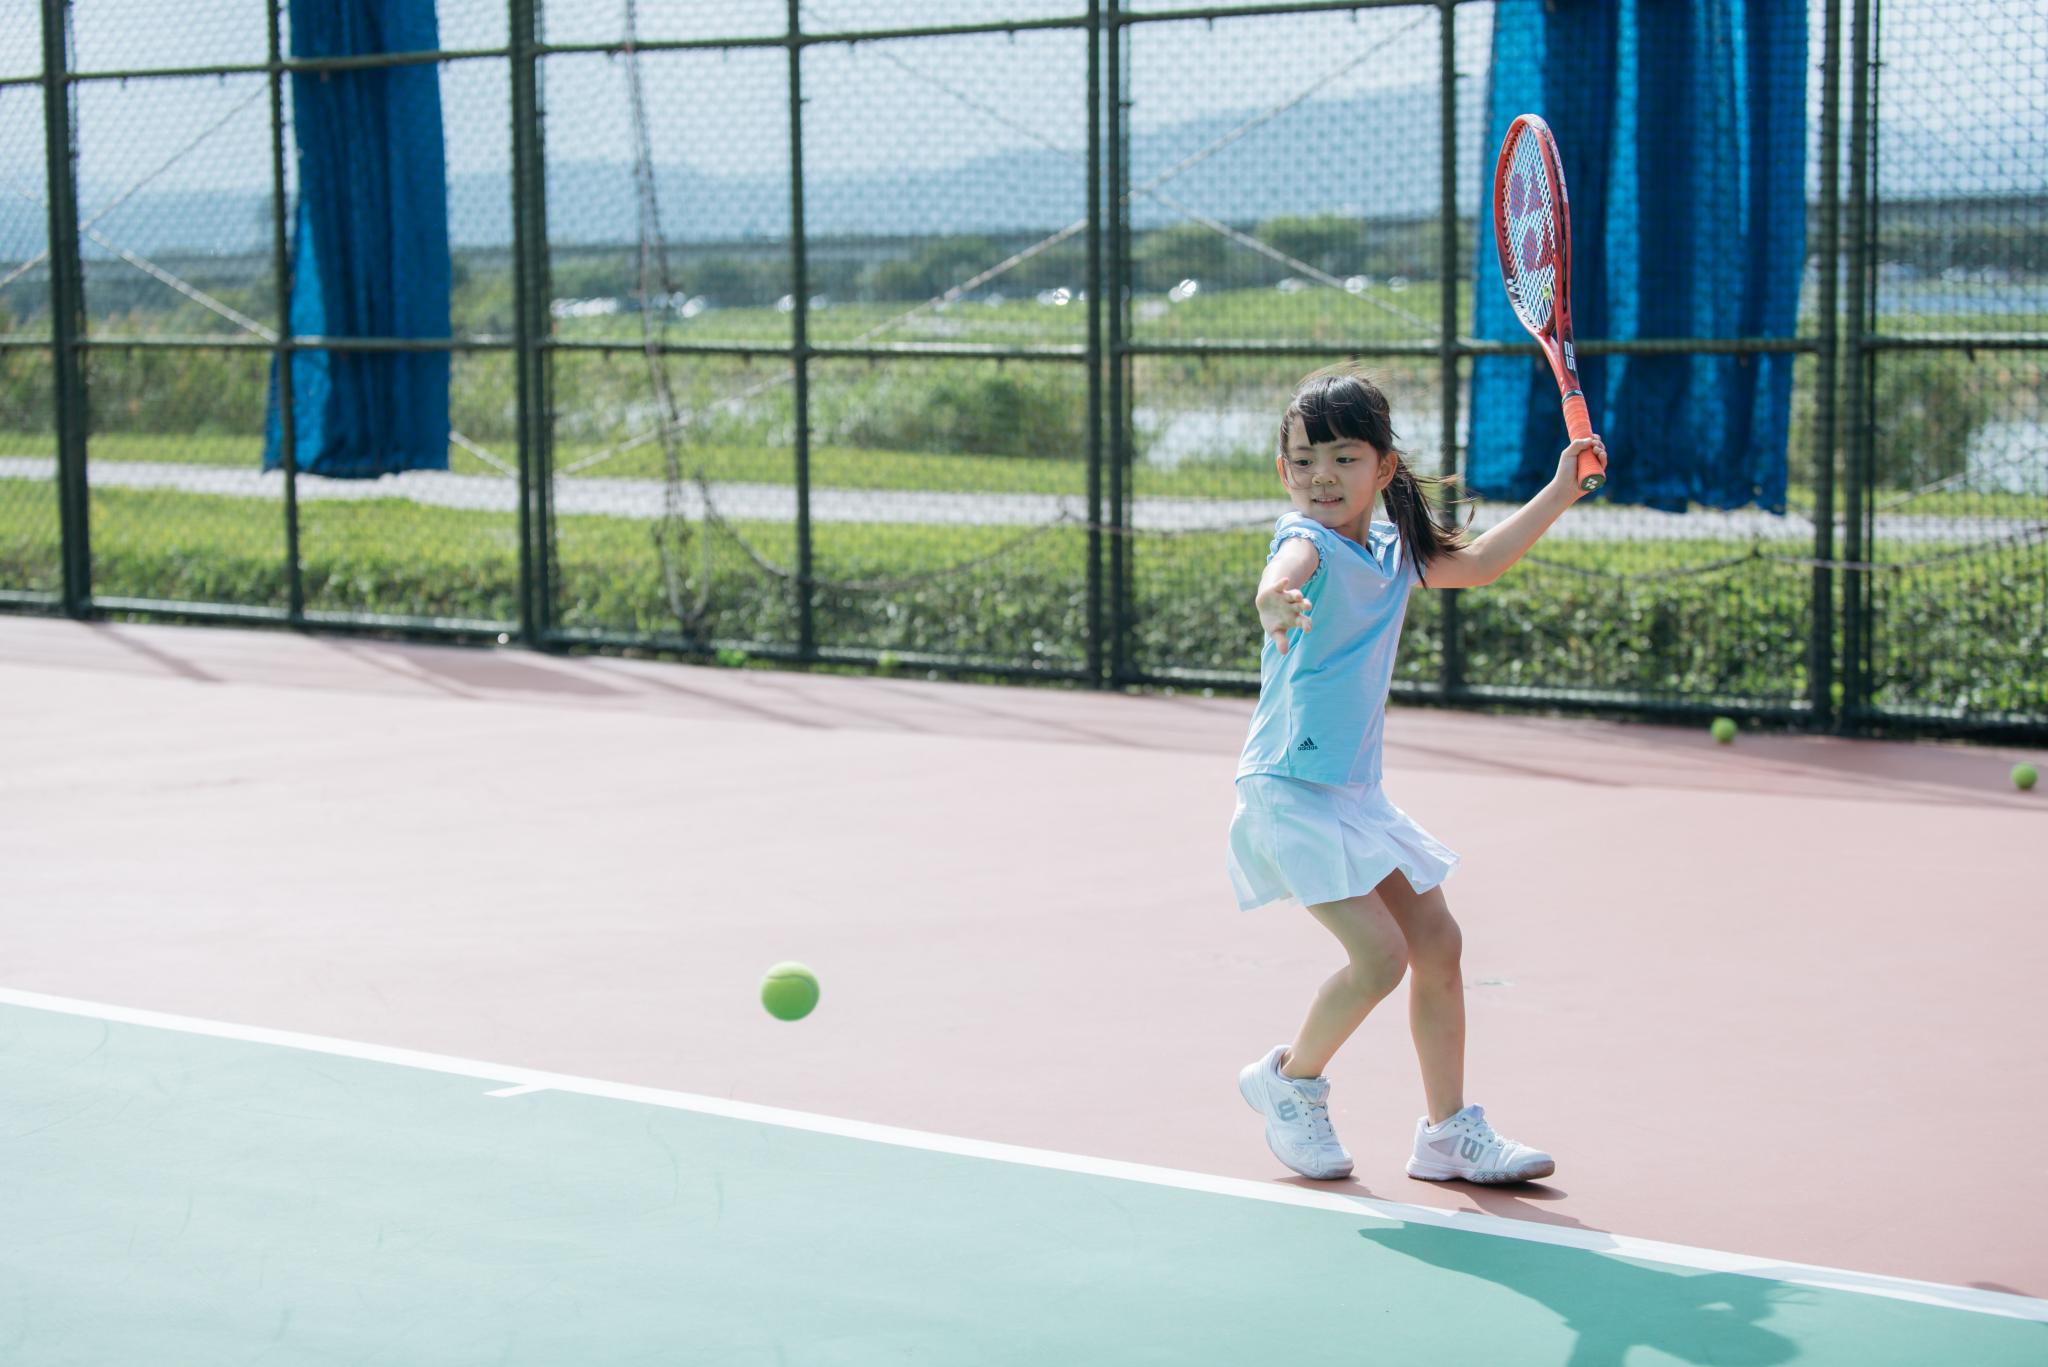 A-star tennis 網球學院 - Andy kuo